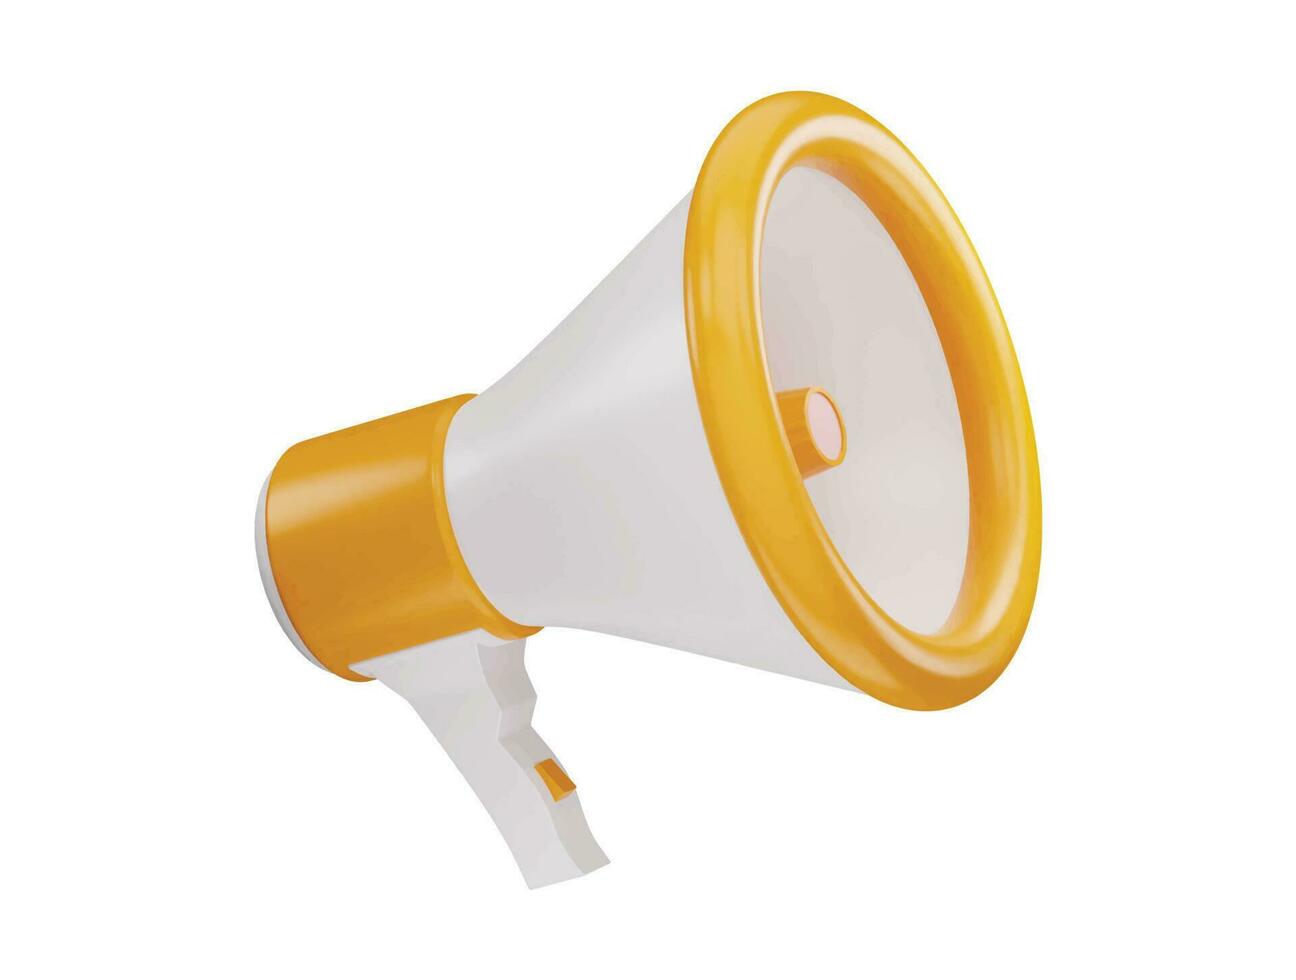 Megaphone icon with 3d vector icon illustration